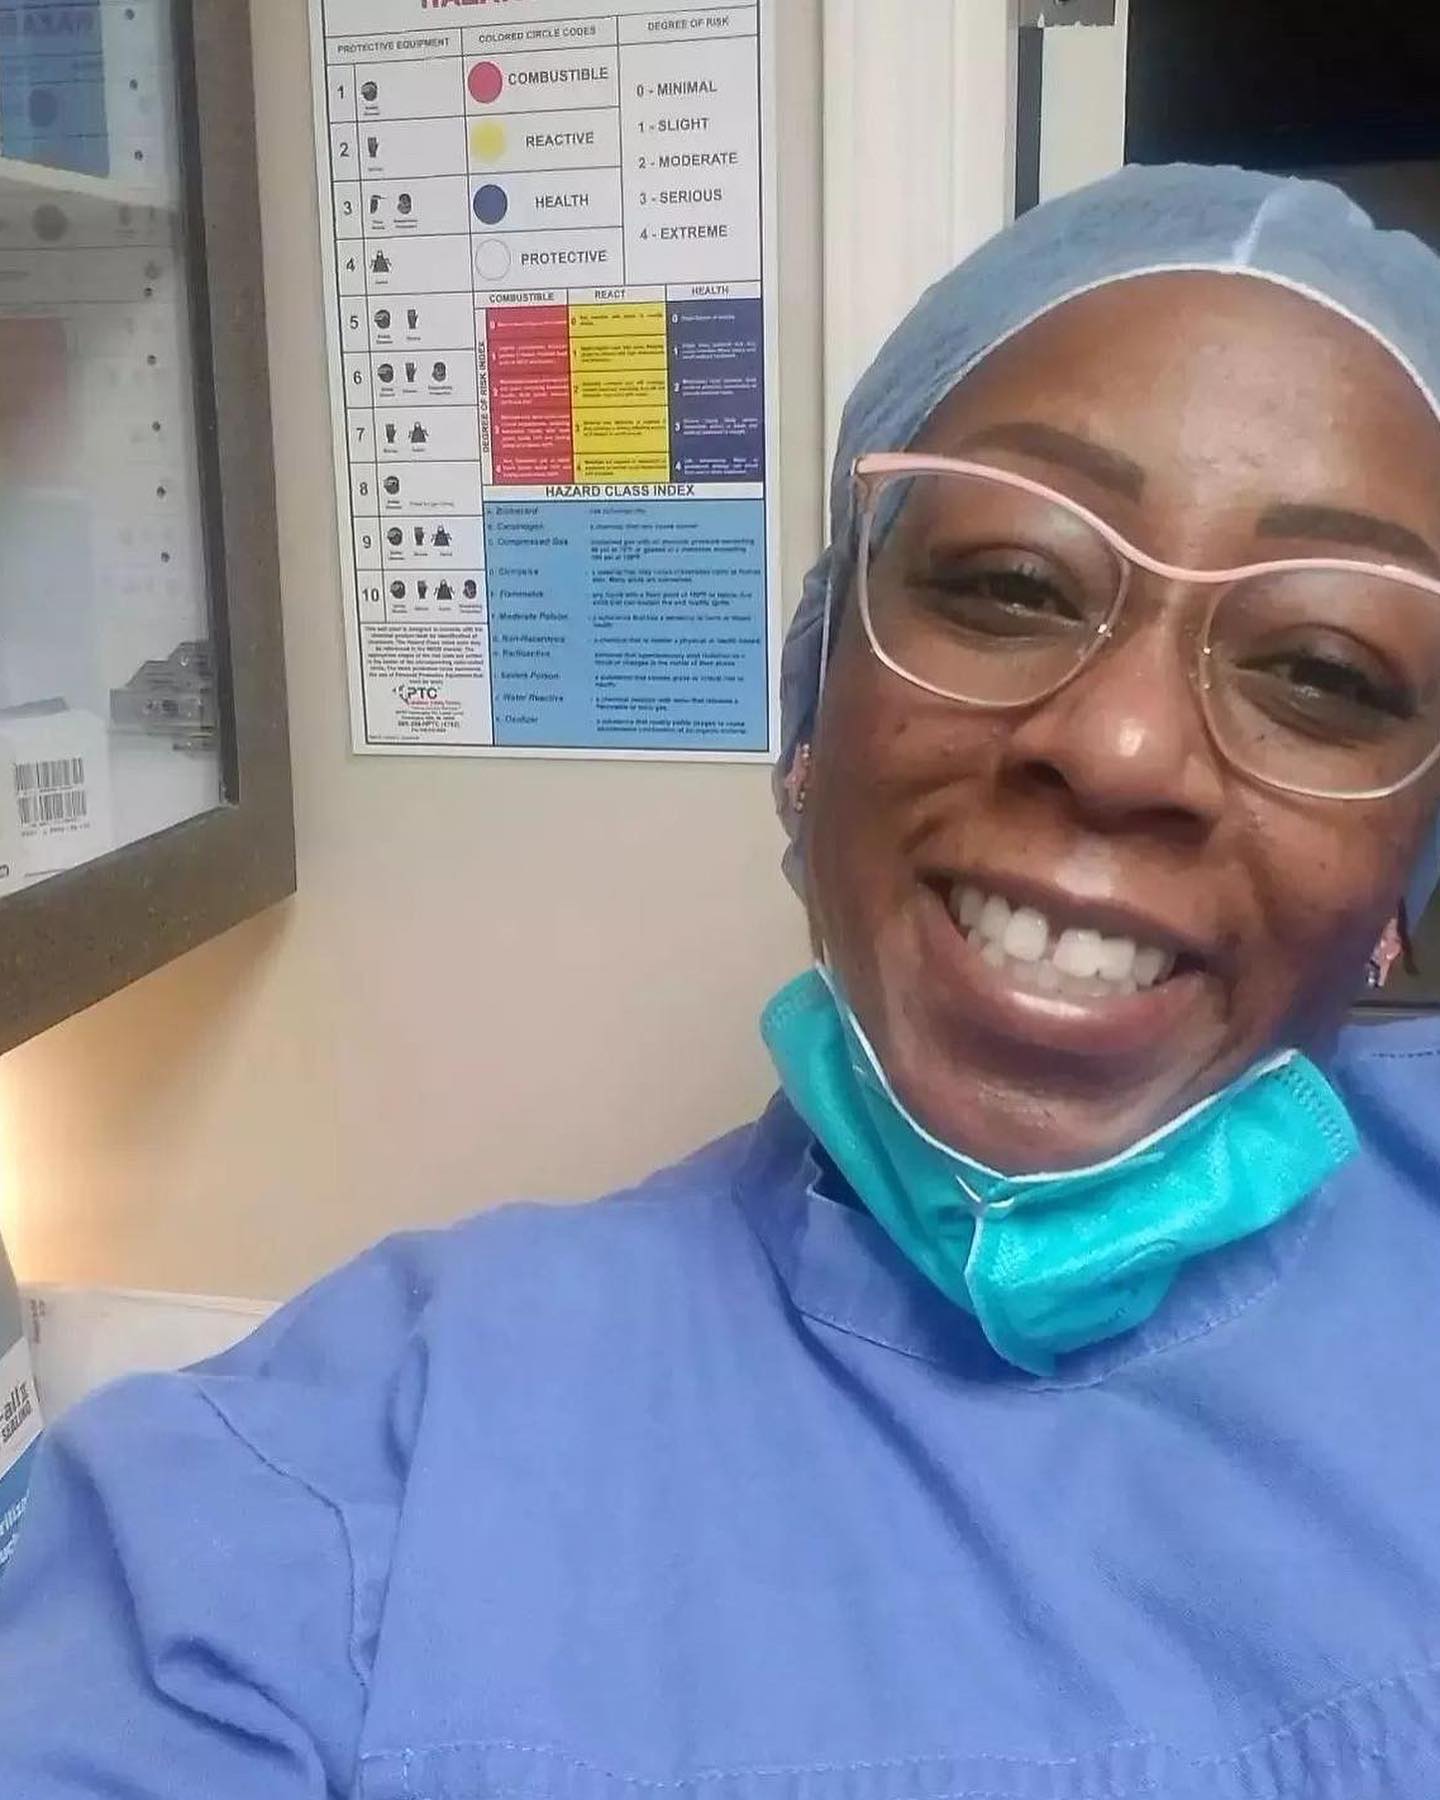 Danni's Tooth Spa owner Danni smiling for the camera wearing her dental scrubs and a face mask pulled down to show her smile